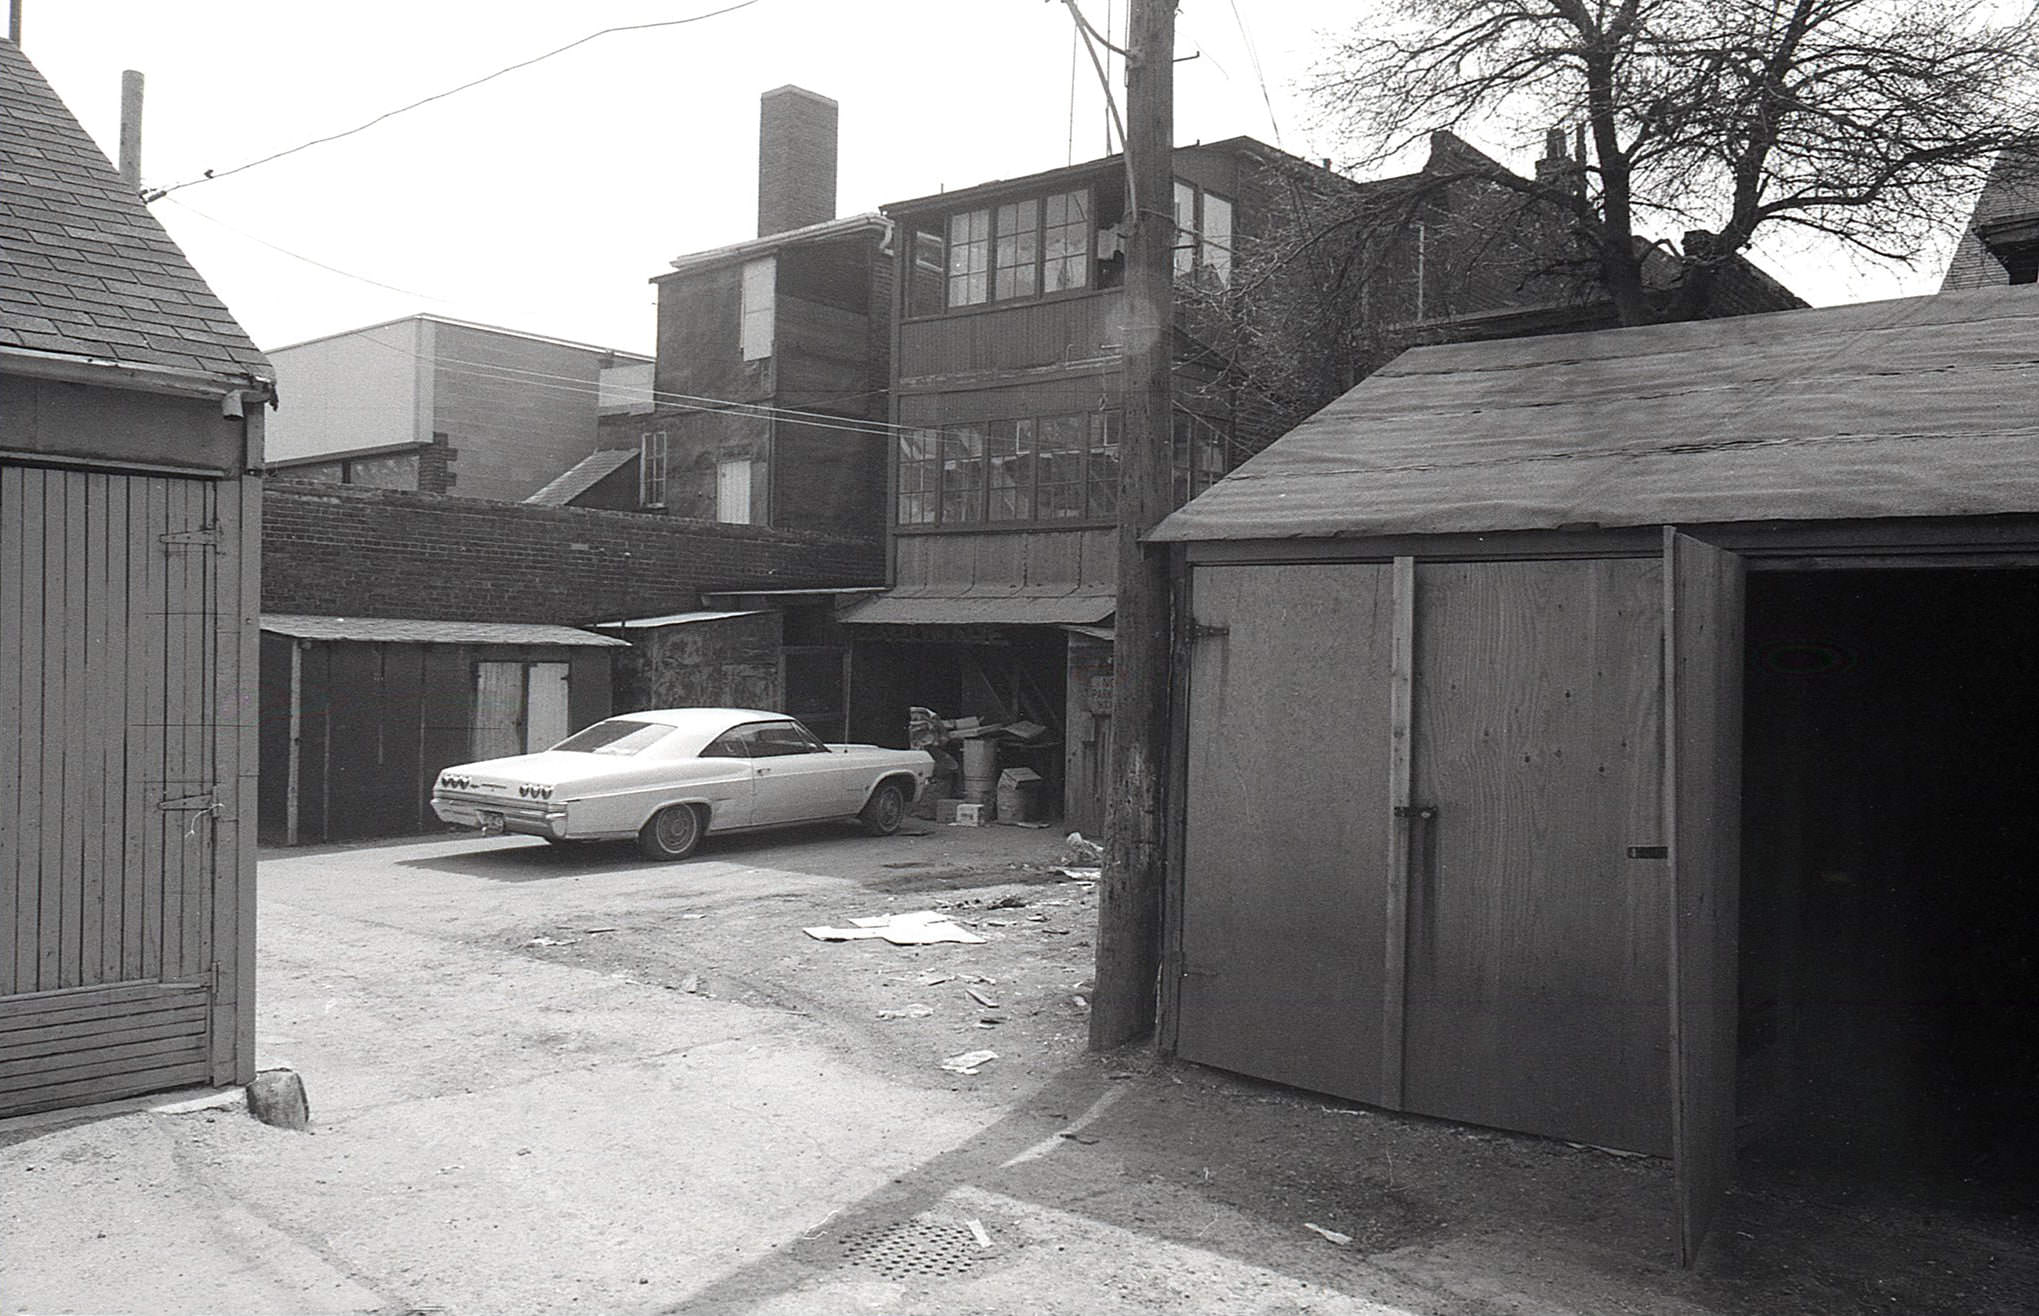 The laneway behind 500-514 Danforth Ave., April, 1969. View looking southeast - a little of the Danforth/Ferrier BMO branch peeking out towards the left.